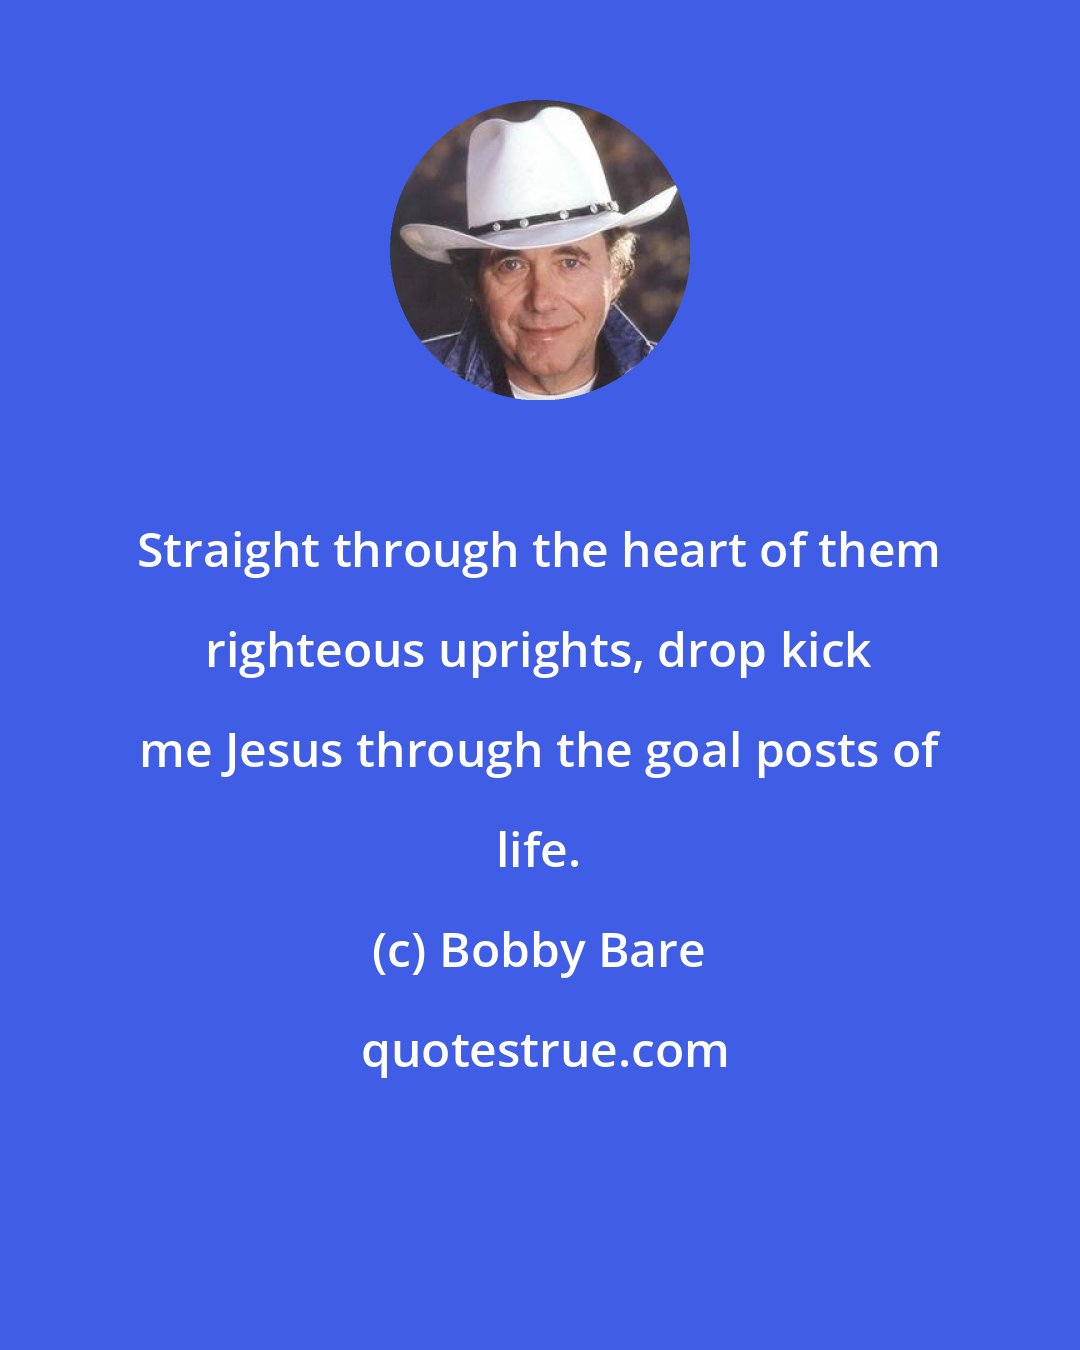 Bobby Bare: Straight through the heart of them righteous uprights, drop kick me Jesus through the goal posts of life.